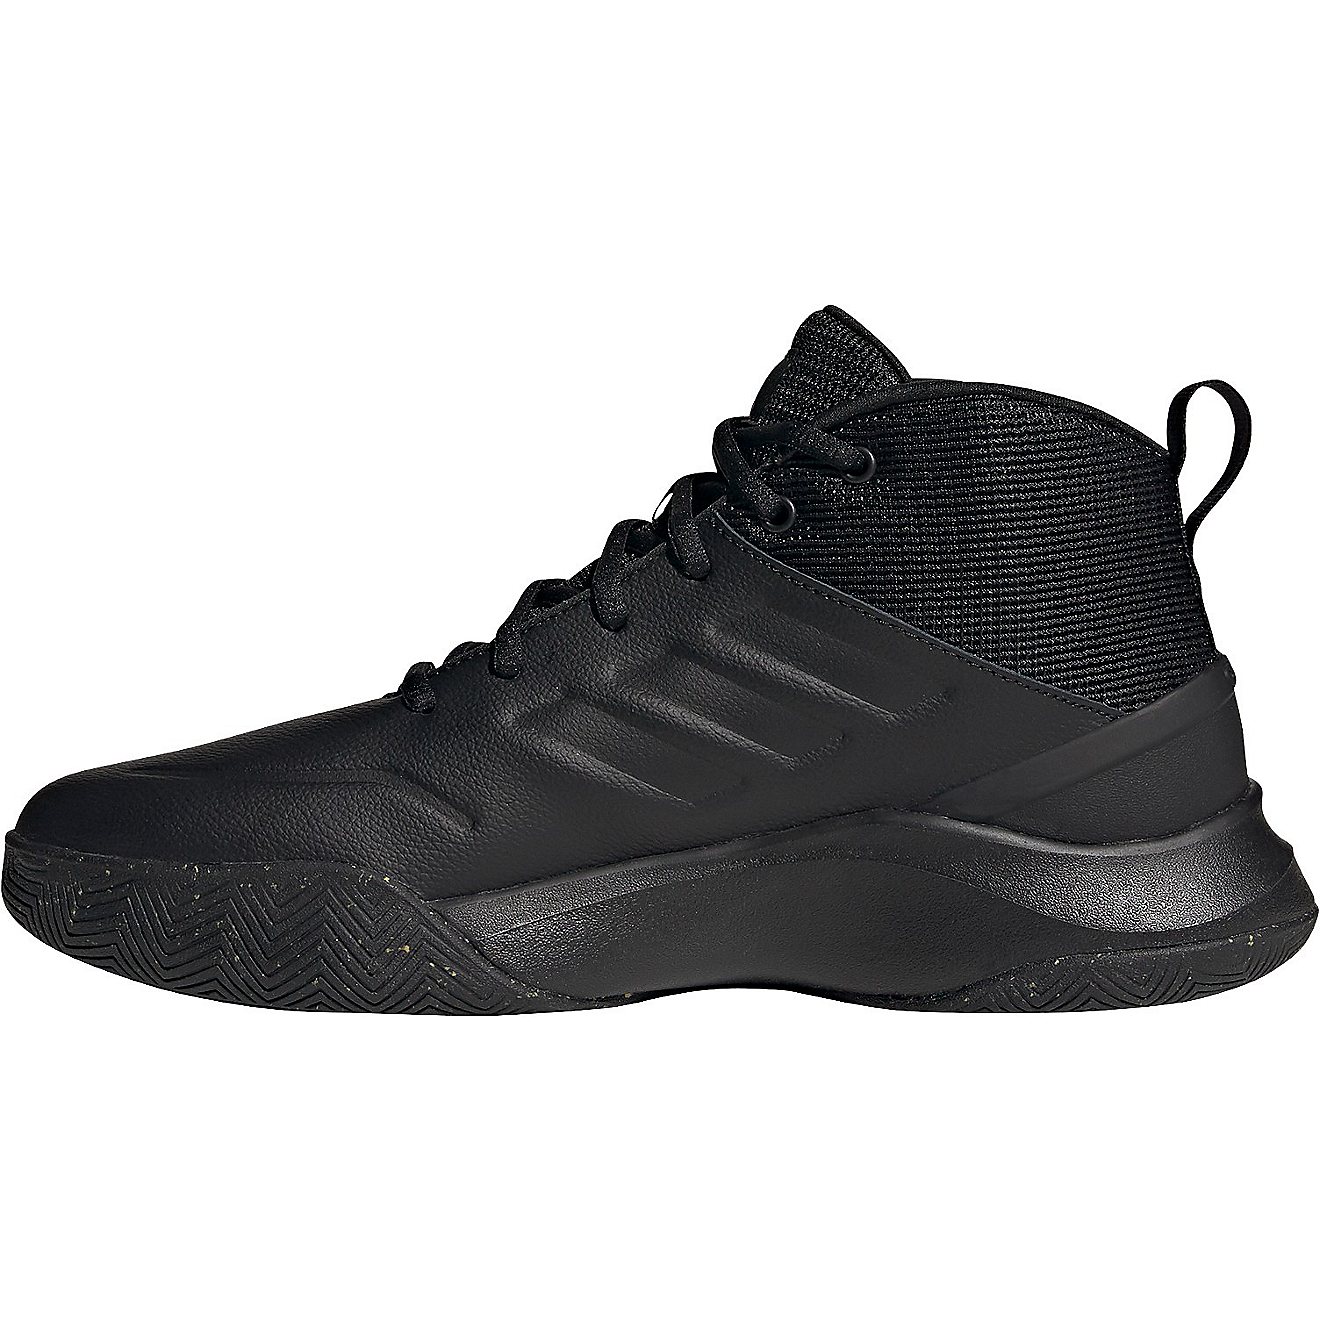 adidas Adults' Own The Game Basketball Shoes                                                                                     - view number 6